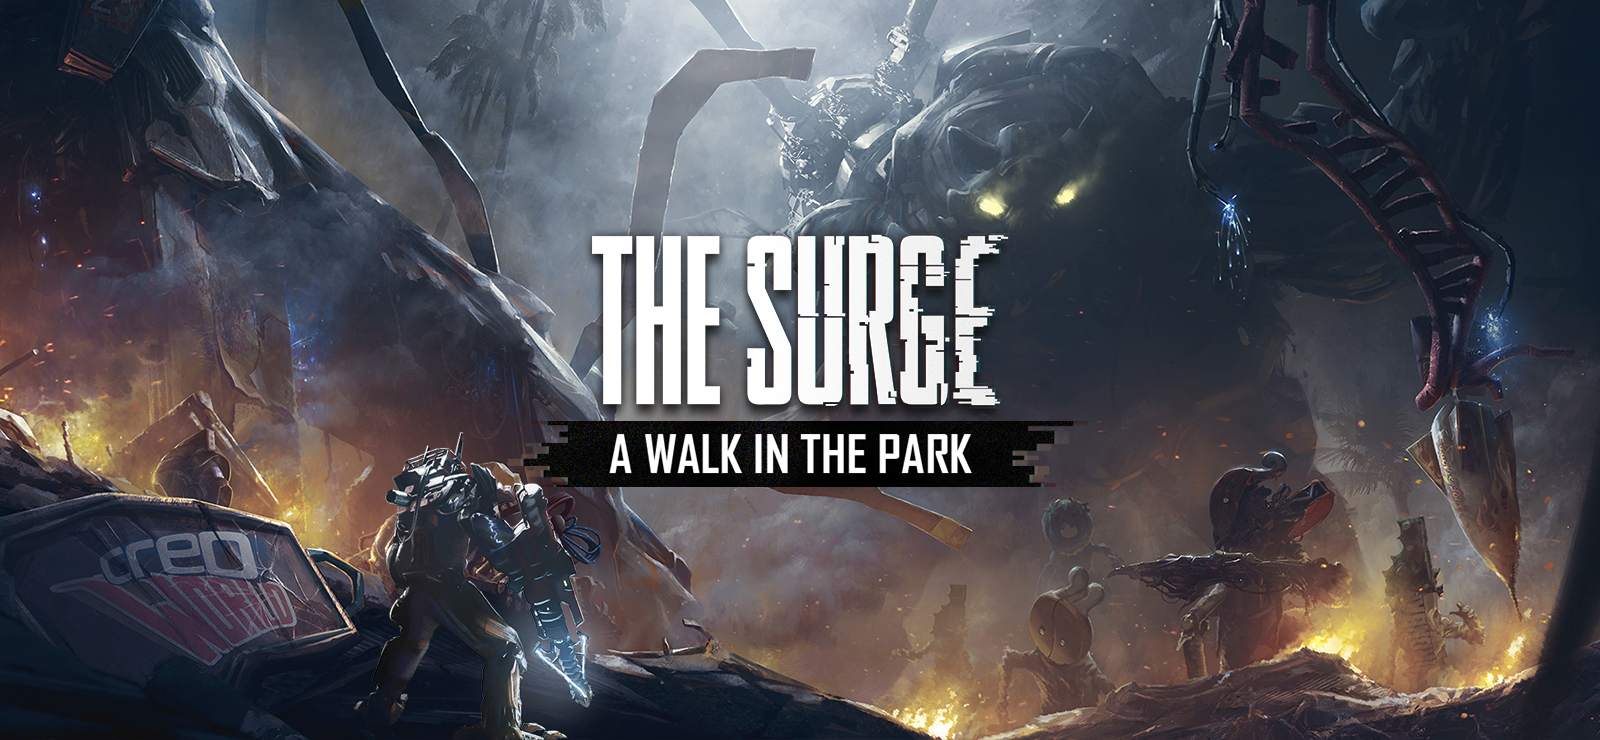 The Surge - A Walk In The Park